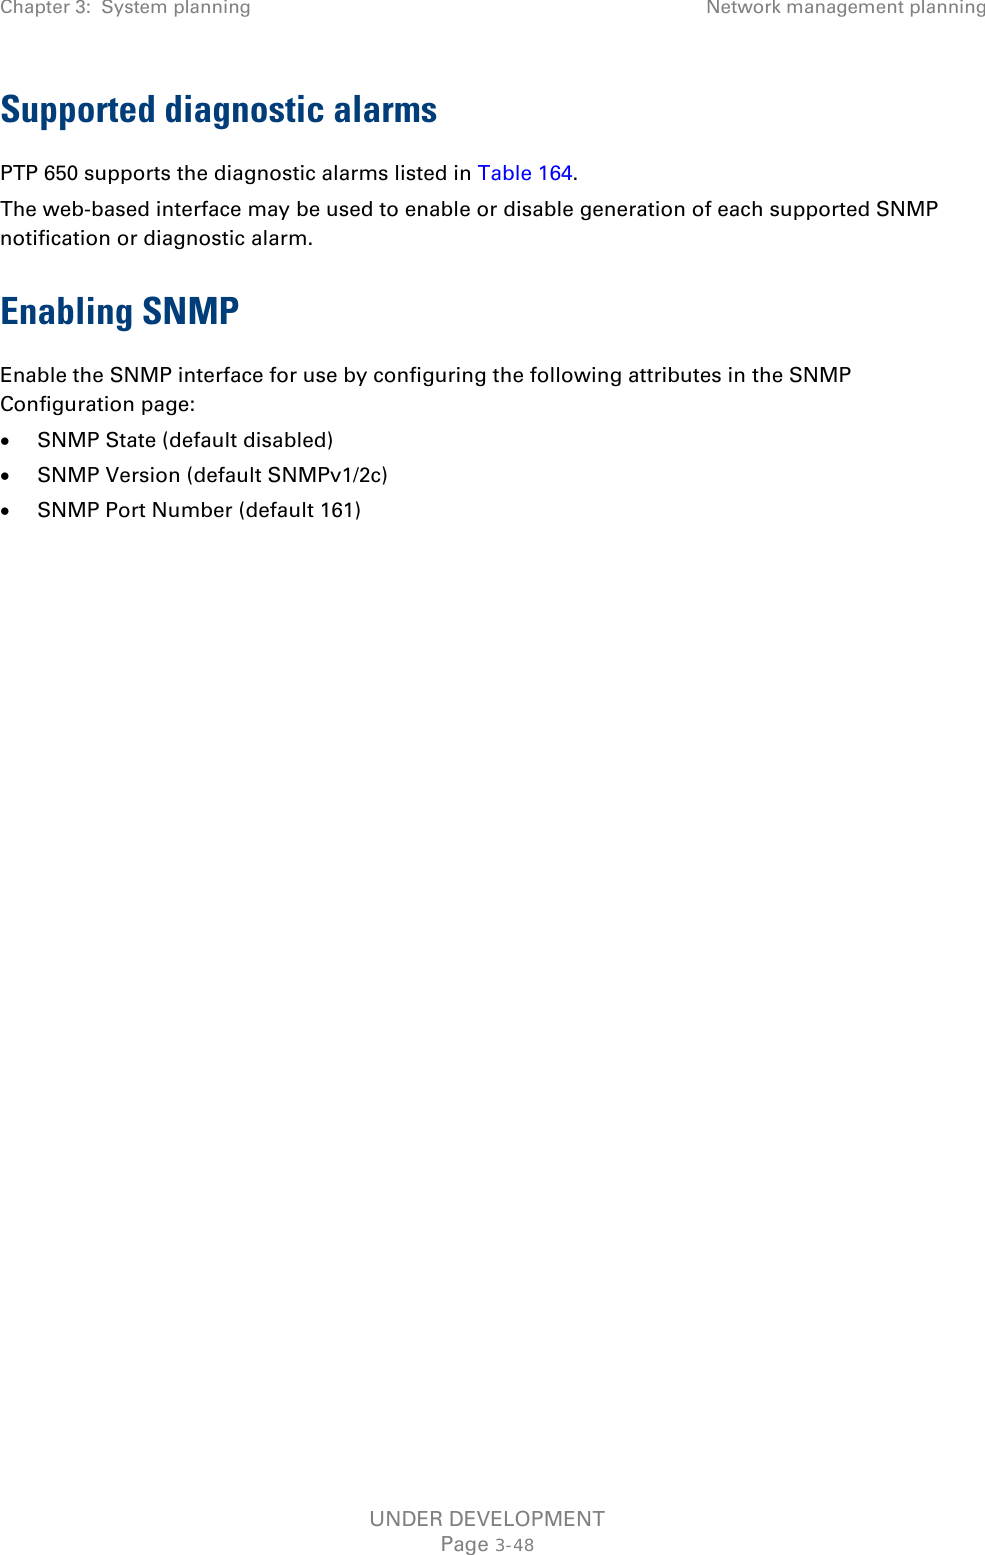 Chapter 3:  System planning Network management planning  Supported diagnostic alarms PTP 650 supports the diagnostic alarms listed in Table 164. The web-based interface may be used to enable or disable generation of each supported SNMP notification or diagnostic alarm. Enabling SNMP Enable the SNMP interface for use by configuring the following attributes in the SNMP Configuration page: • SNMP State (default disabled) • SNMP Version (default SNMPv1/2c) • SNMP Port Number (default 161)    UNDER DEVELOPMENT Page 3-48 